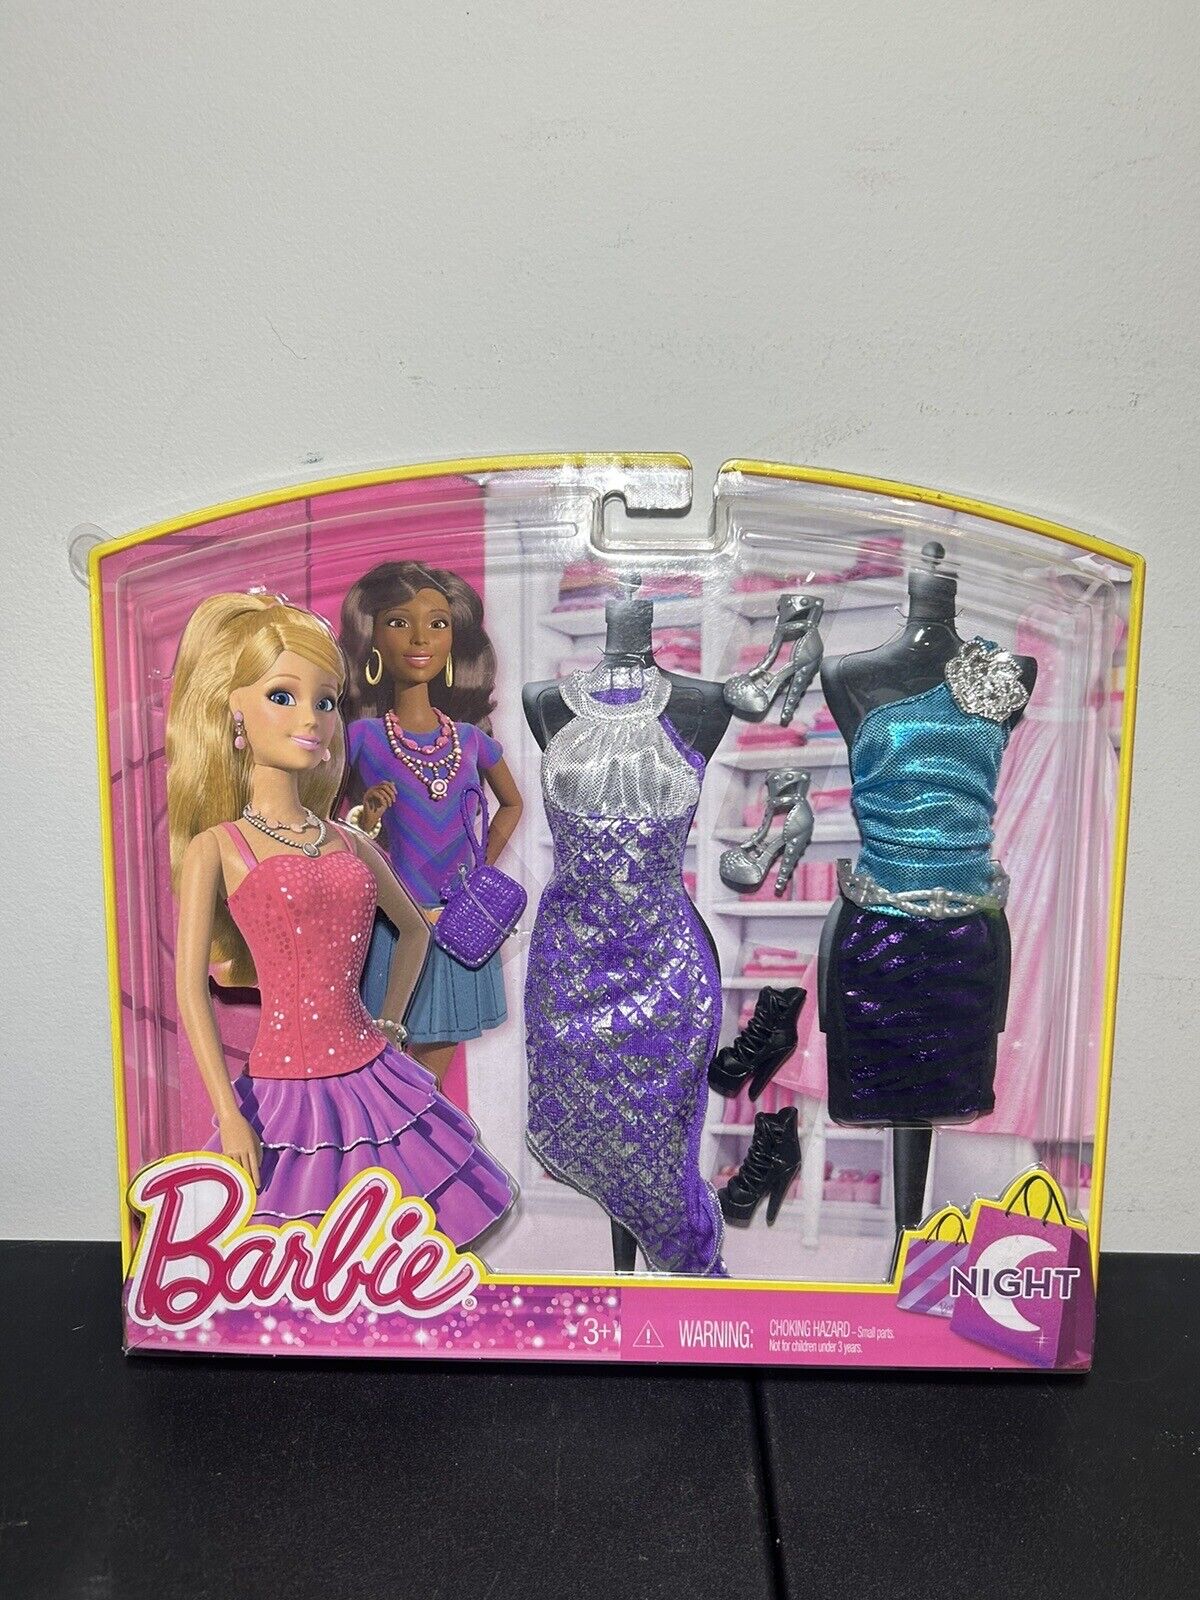 Barbie LIfe in the Dreamhouse Night Looks Fashion Pack outfits 2013 Mattel NOS